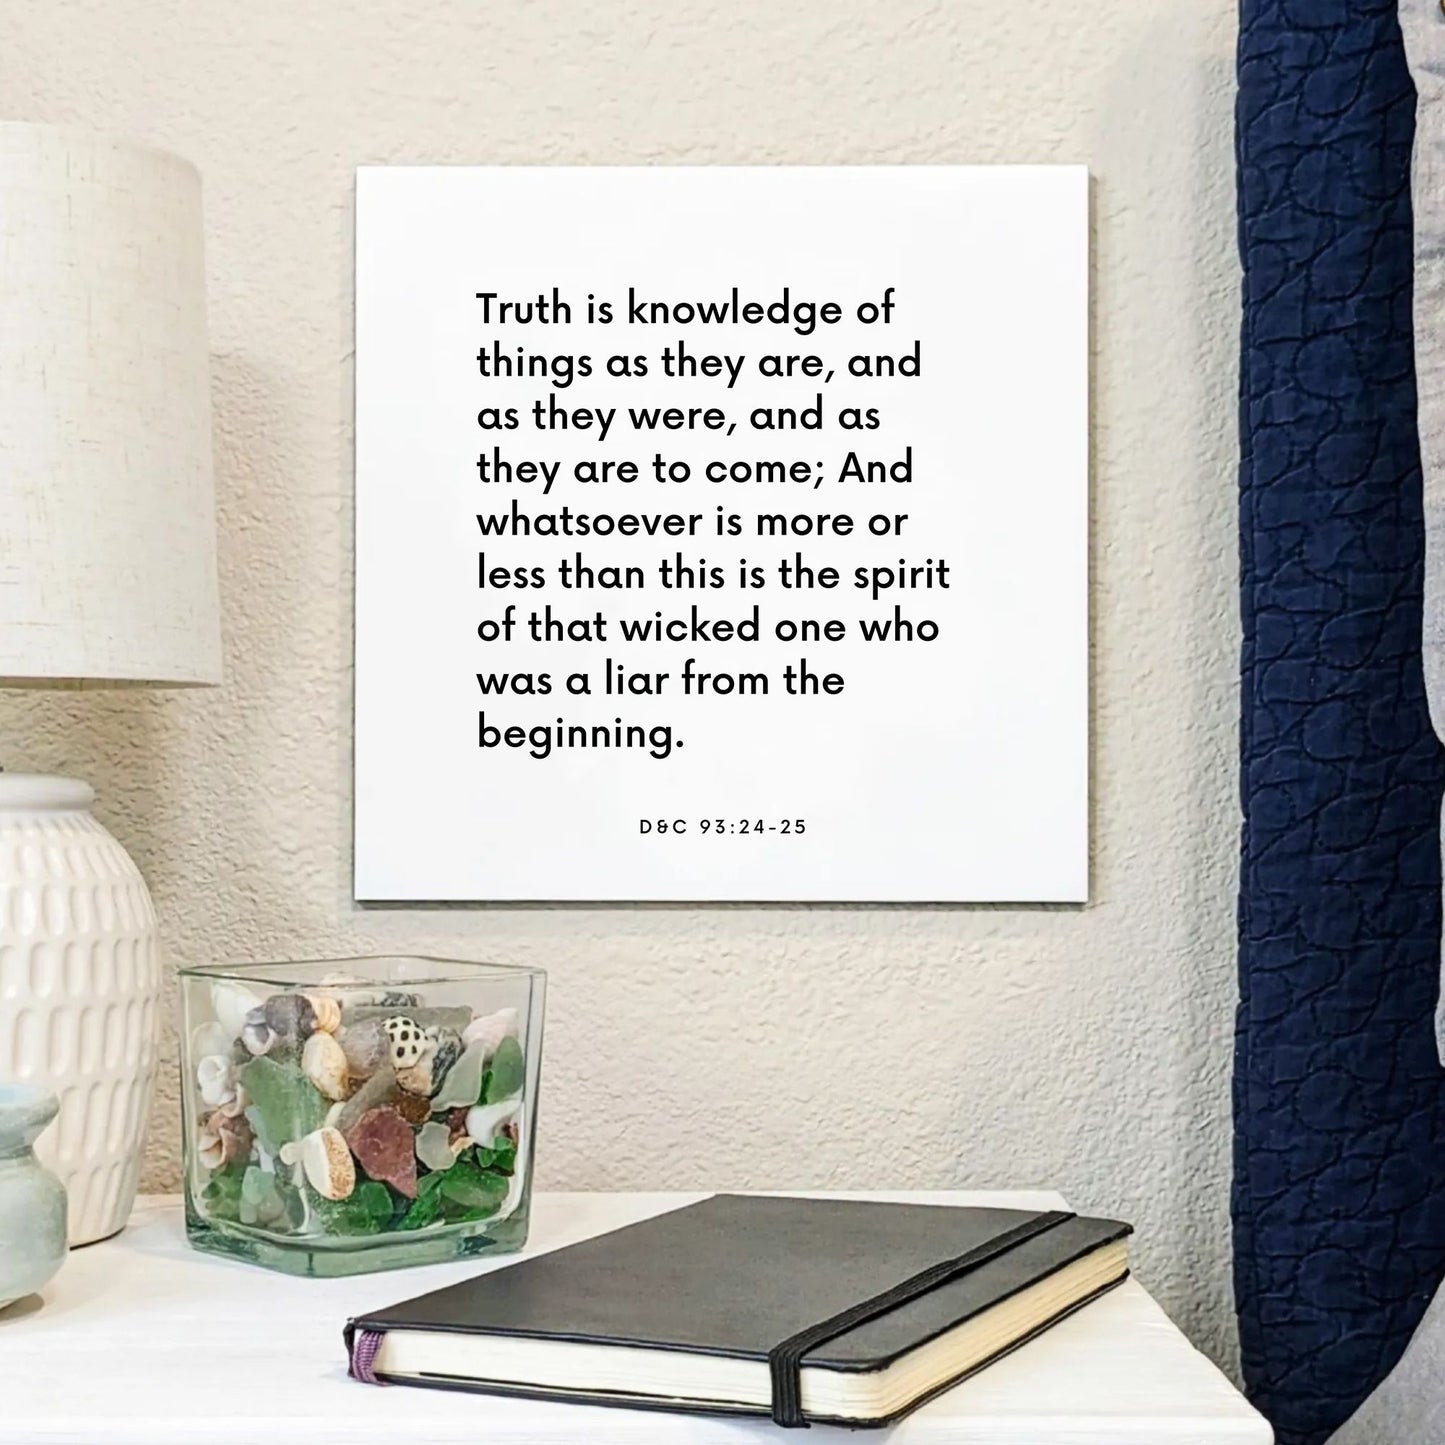 Bedside mouting of the scripture tile for D&C 93:24-25 - "Truth is knowledge of things as they are"